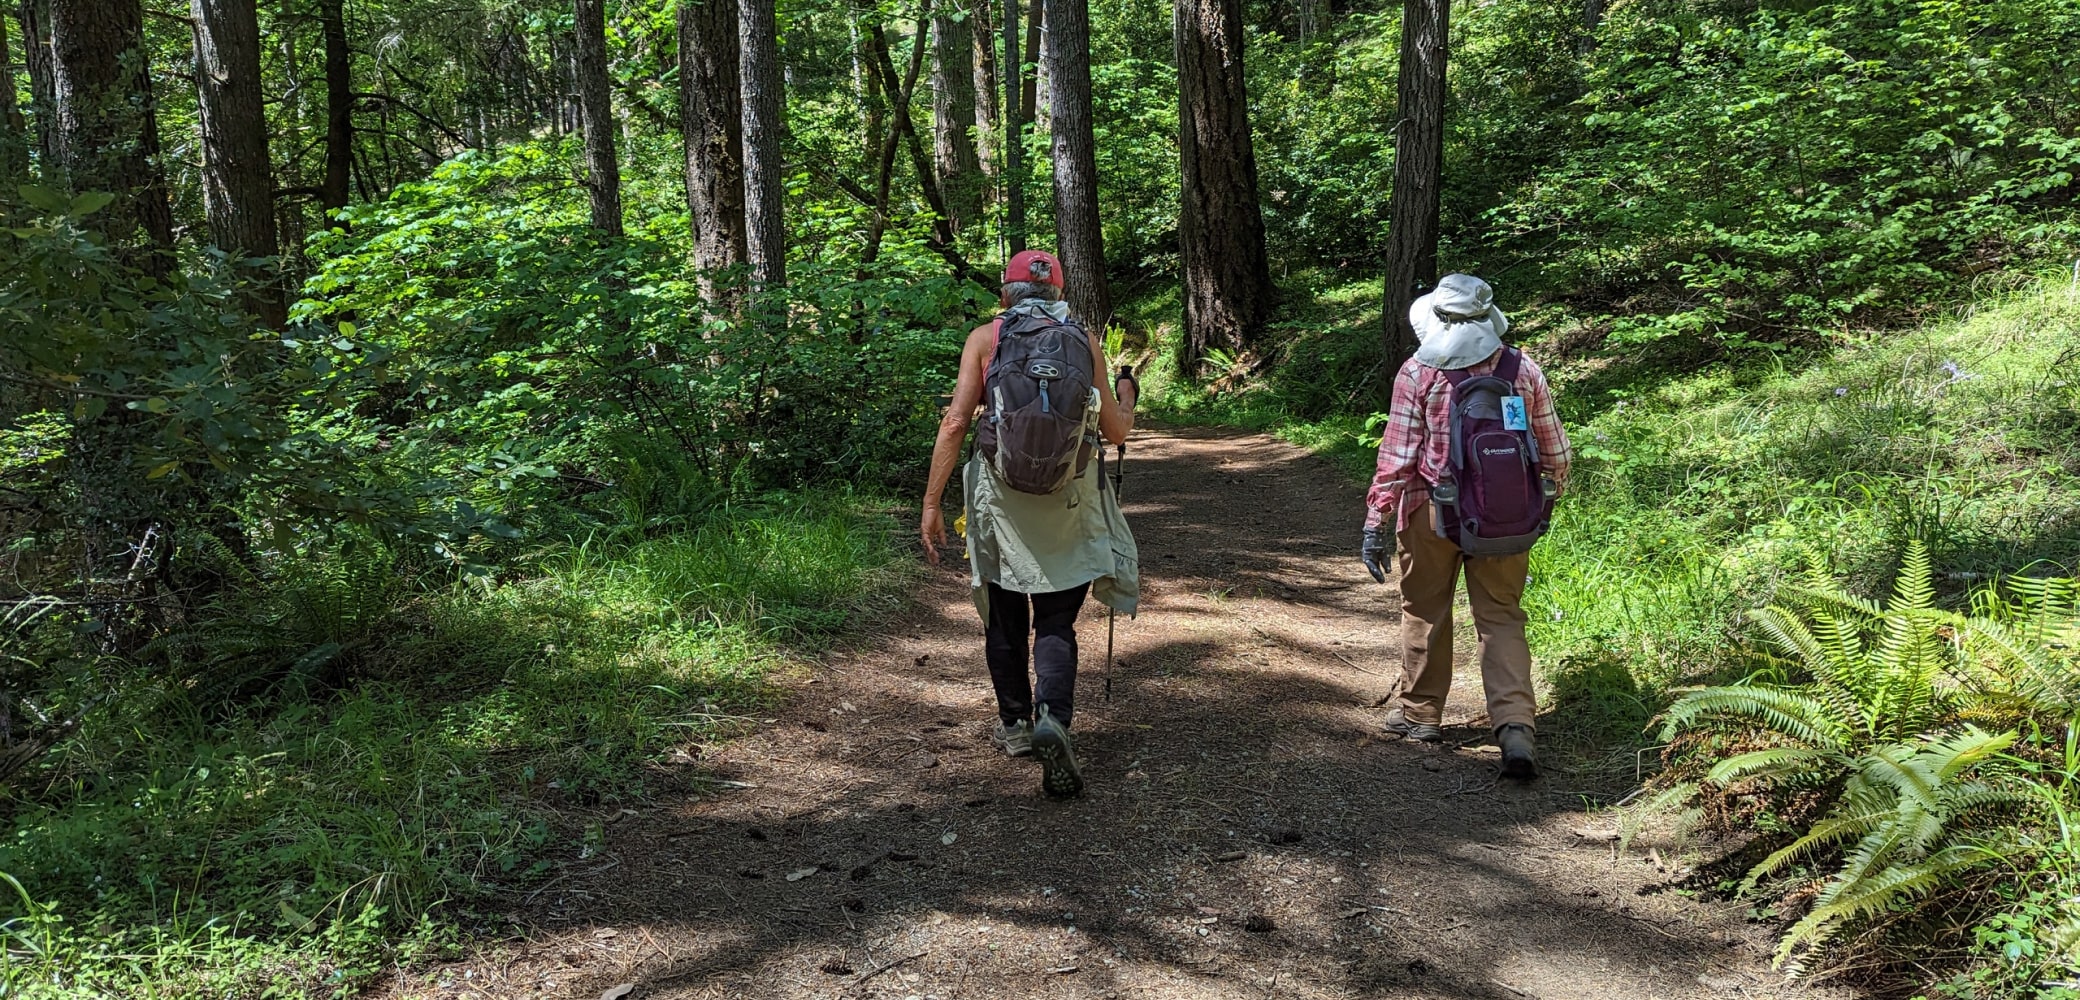 Two hikers walk down an Oregon trail in a lush green forest during a road scholar trip.